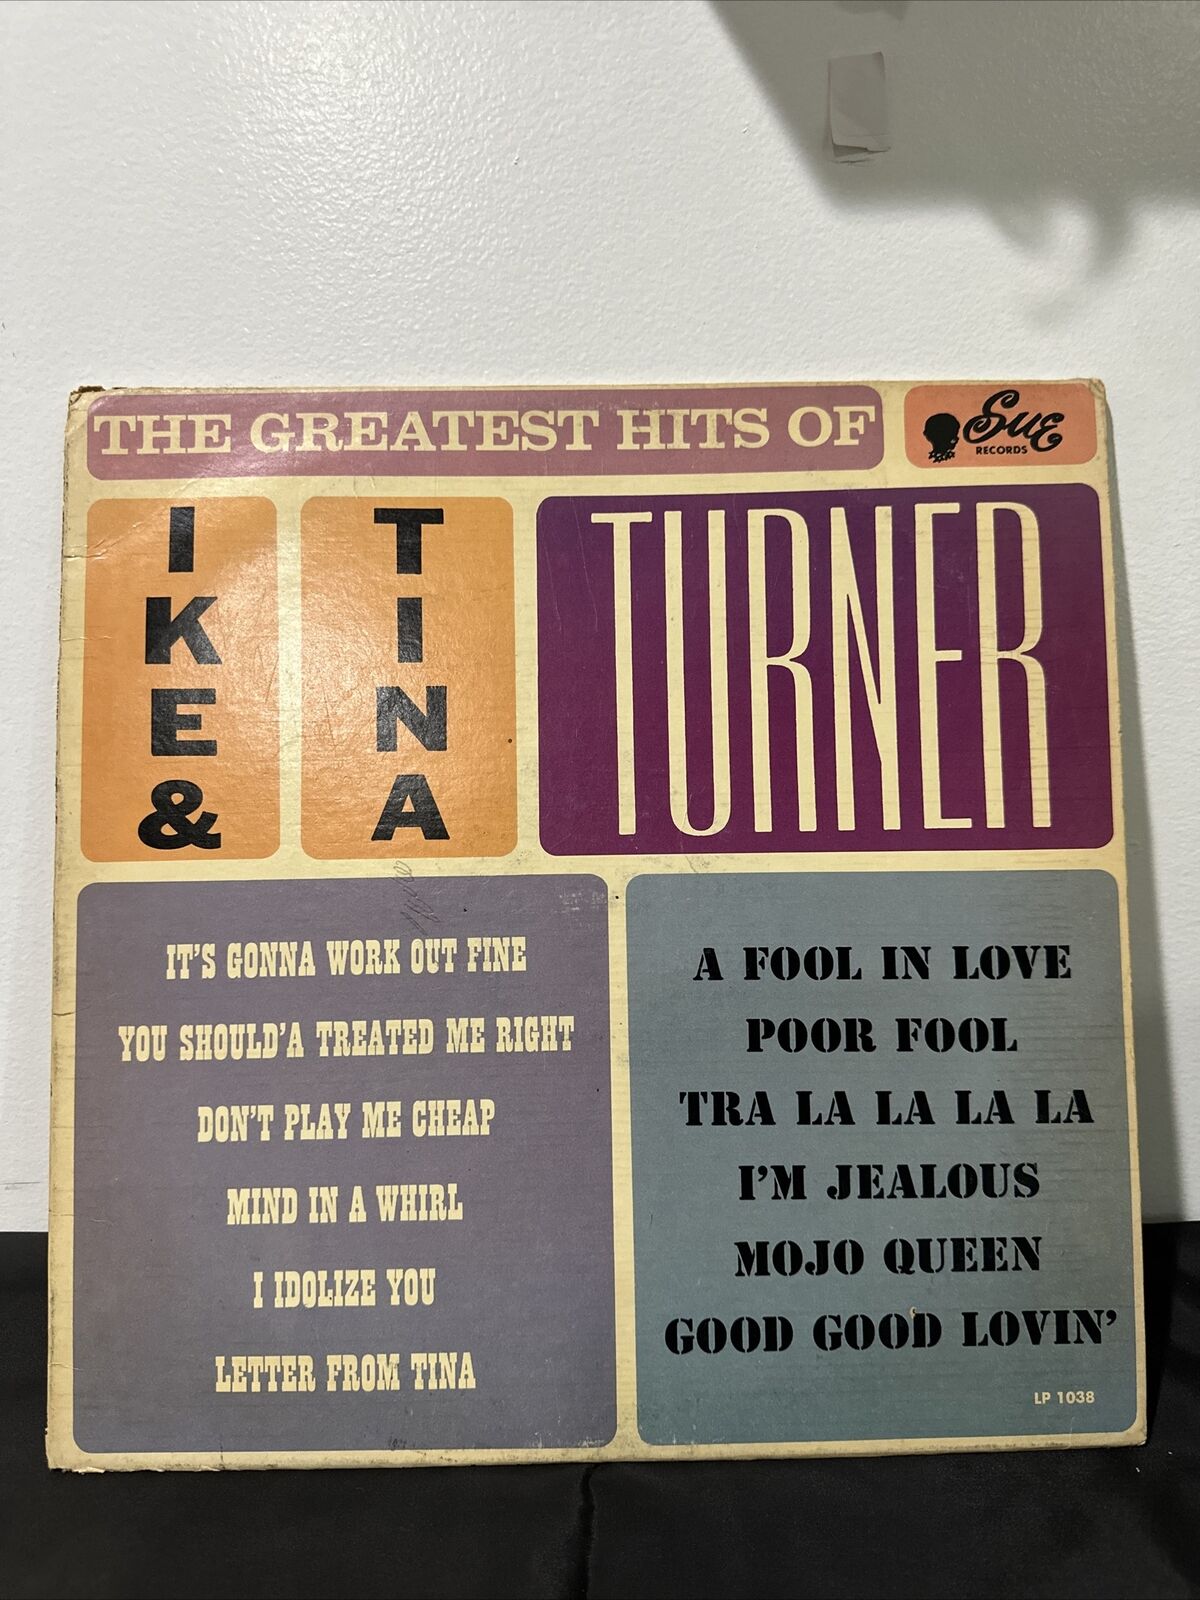 Ike & Tina Turner LP - Greatest Hits - Sue Records 1038